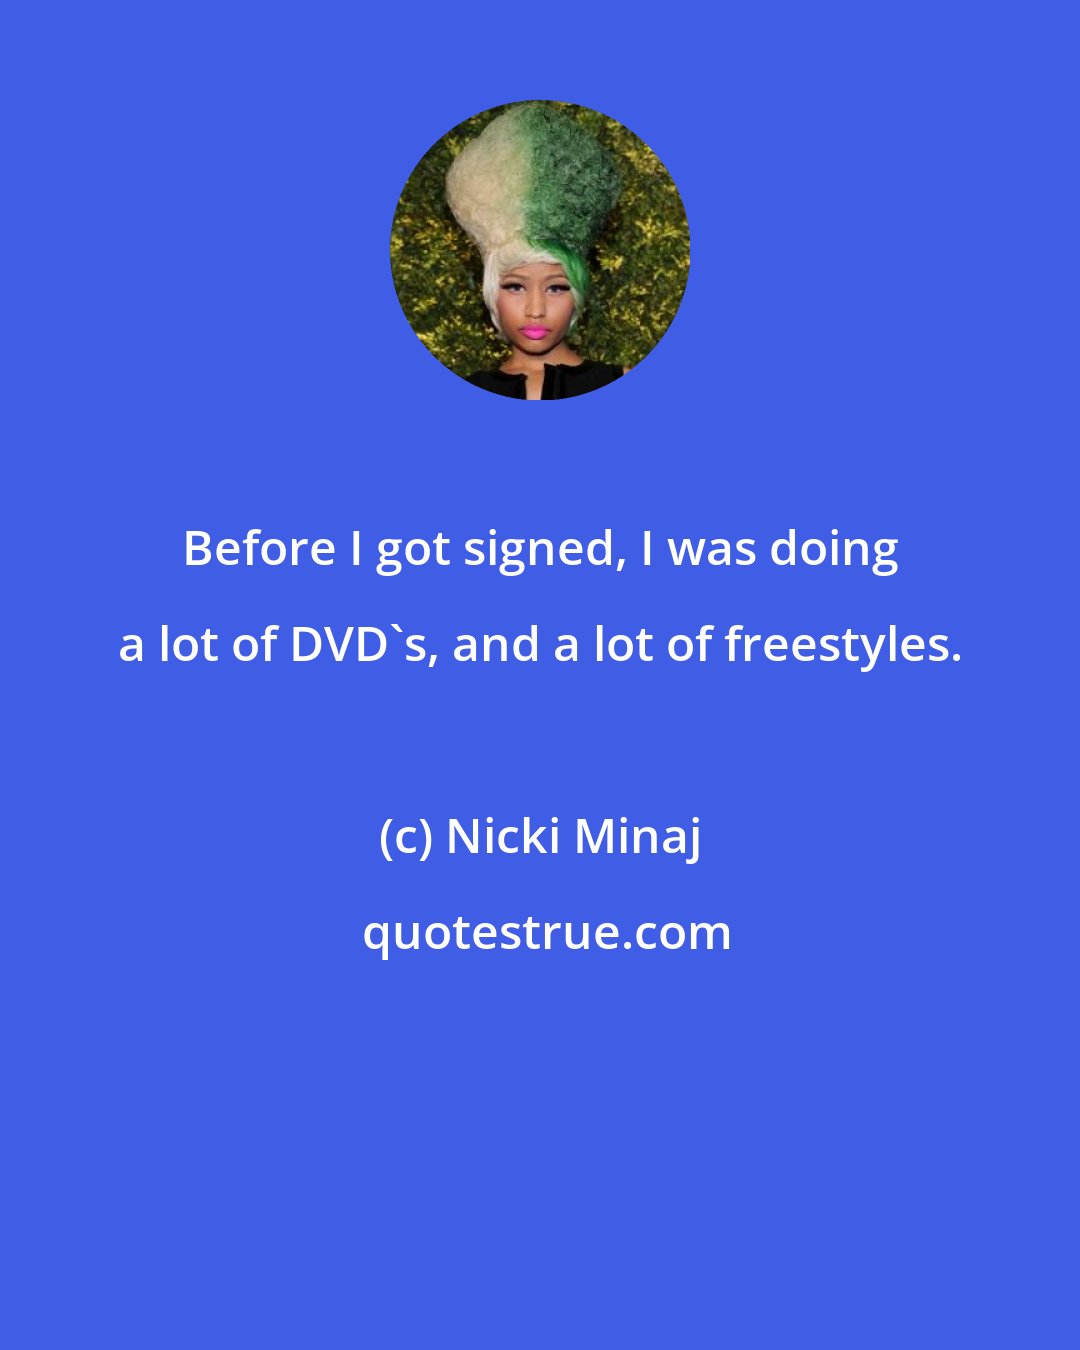 Nicki Minaj: Before I got signed, I was doing a lot of DVD's, and a lot of freestyles.